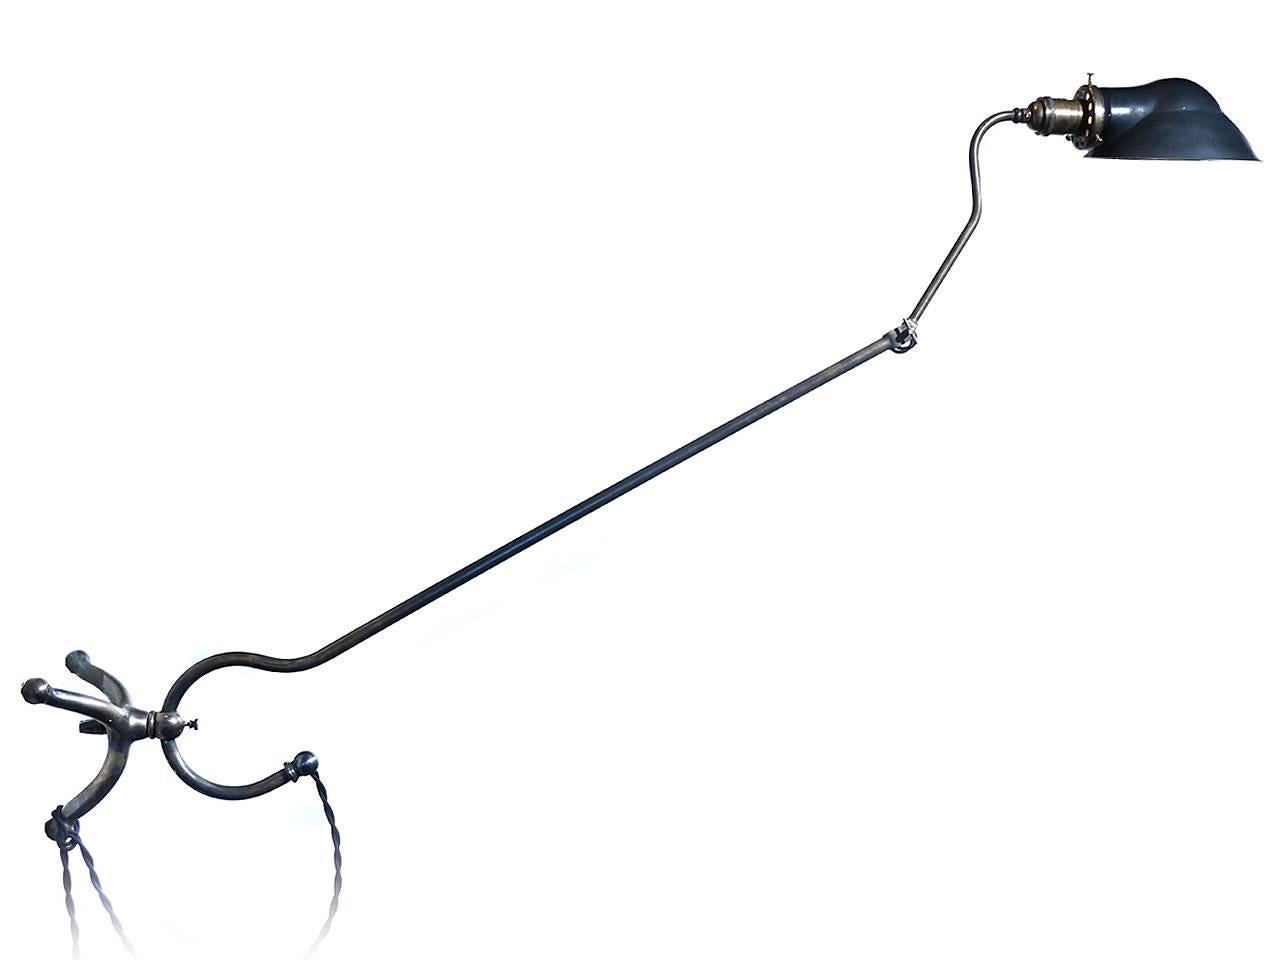 The look of this four foot long articulated lamp is totally unique. The base is a solid tripod casting with a lockable fitting. The arm has a question mark style curved pipe that rides in the fitting to raise and lower the lamp. There is a second